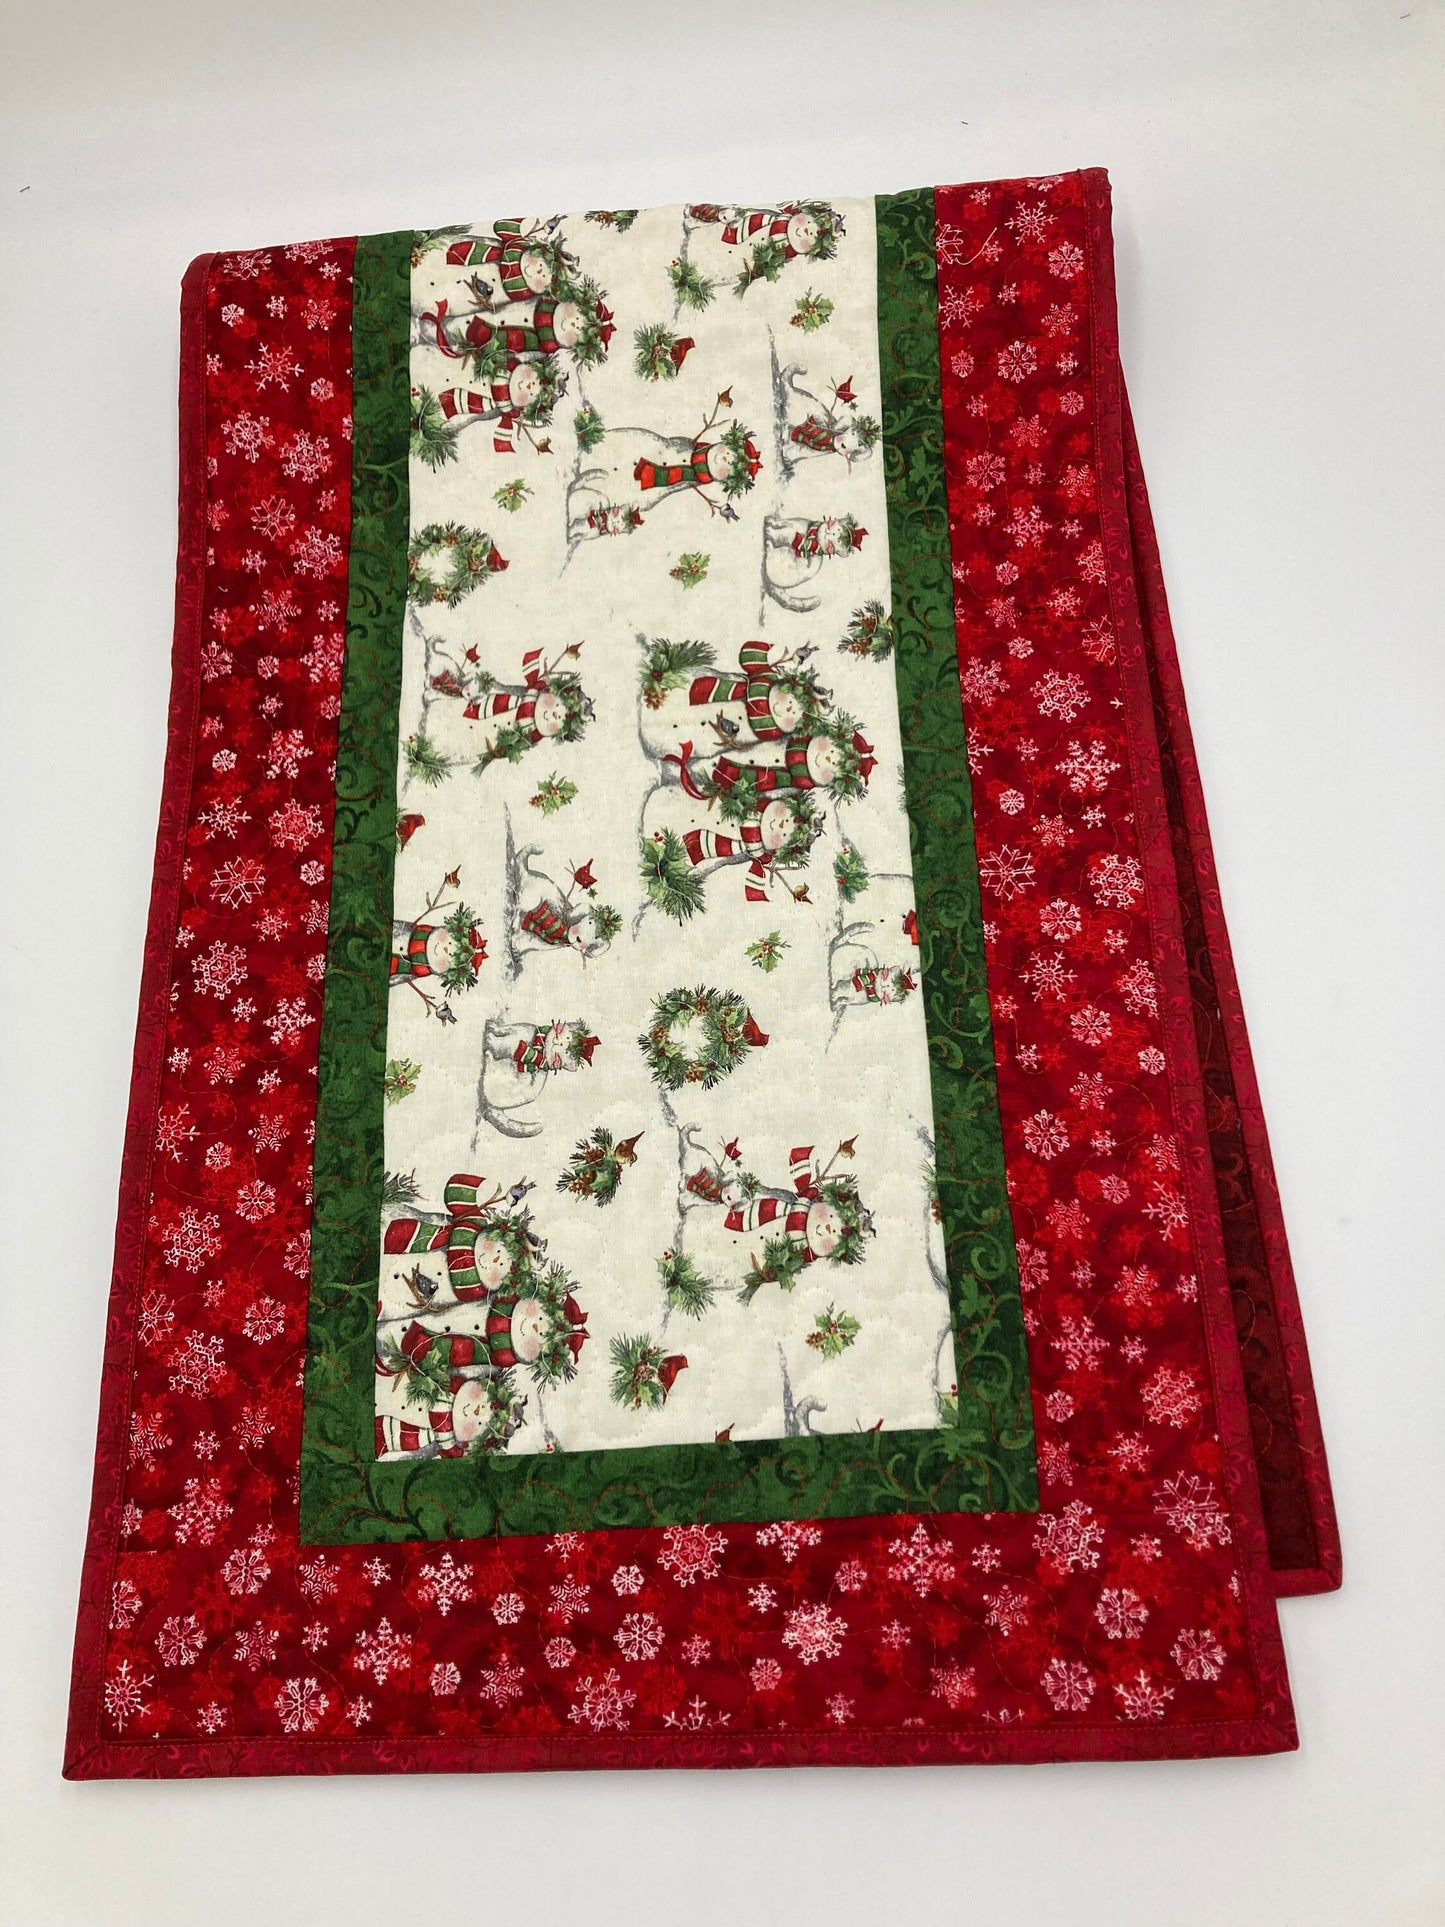 Snowman Christmas Winter Table Runner, 14x48" Quilted, Reversible, Snowflakes Birds Cats Scarves Children Whimsical, Dining Coffee Table